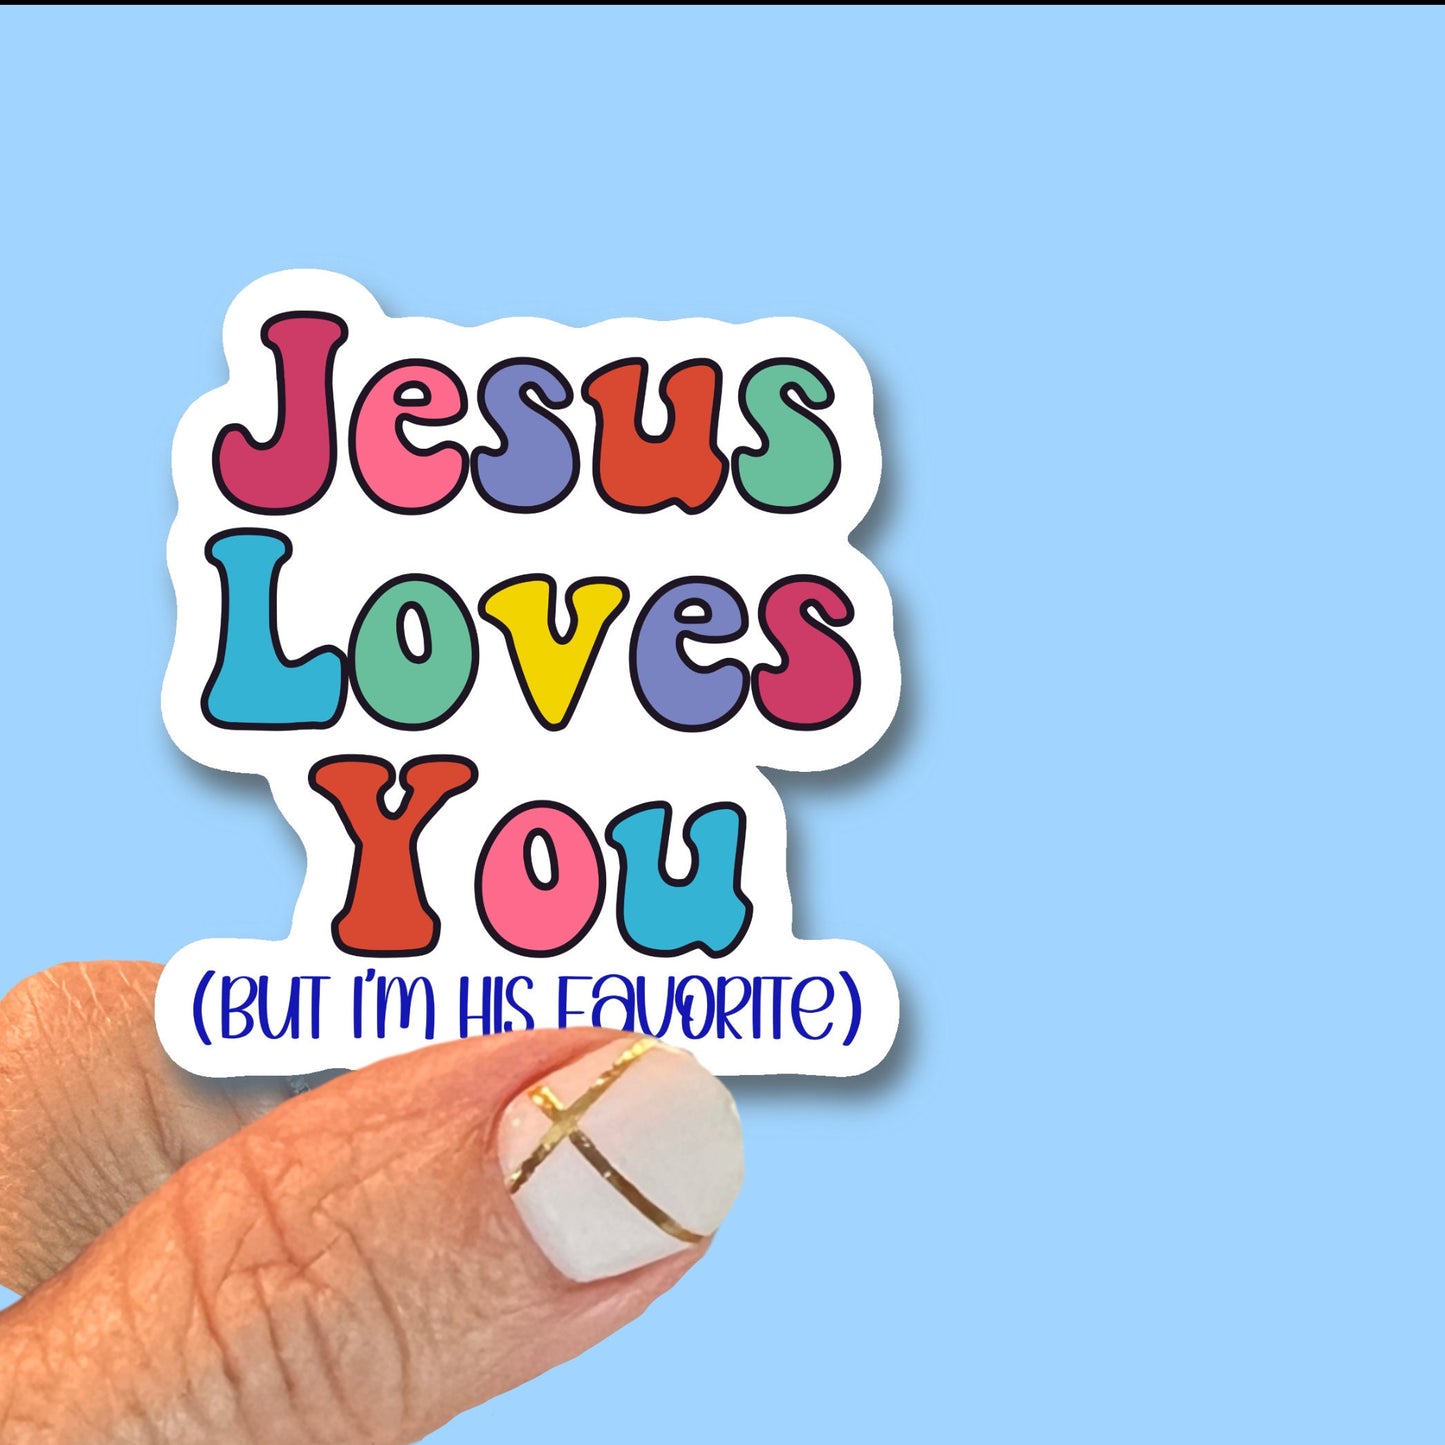 Jesus loves you, but I'm his favorite - Fun Christian Faith UV/ Waterproof Vinyl Sticker/ Decal- Choice of Size, Single or Bulk qty